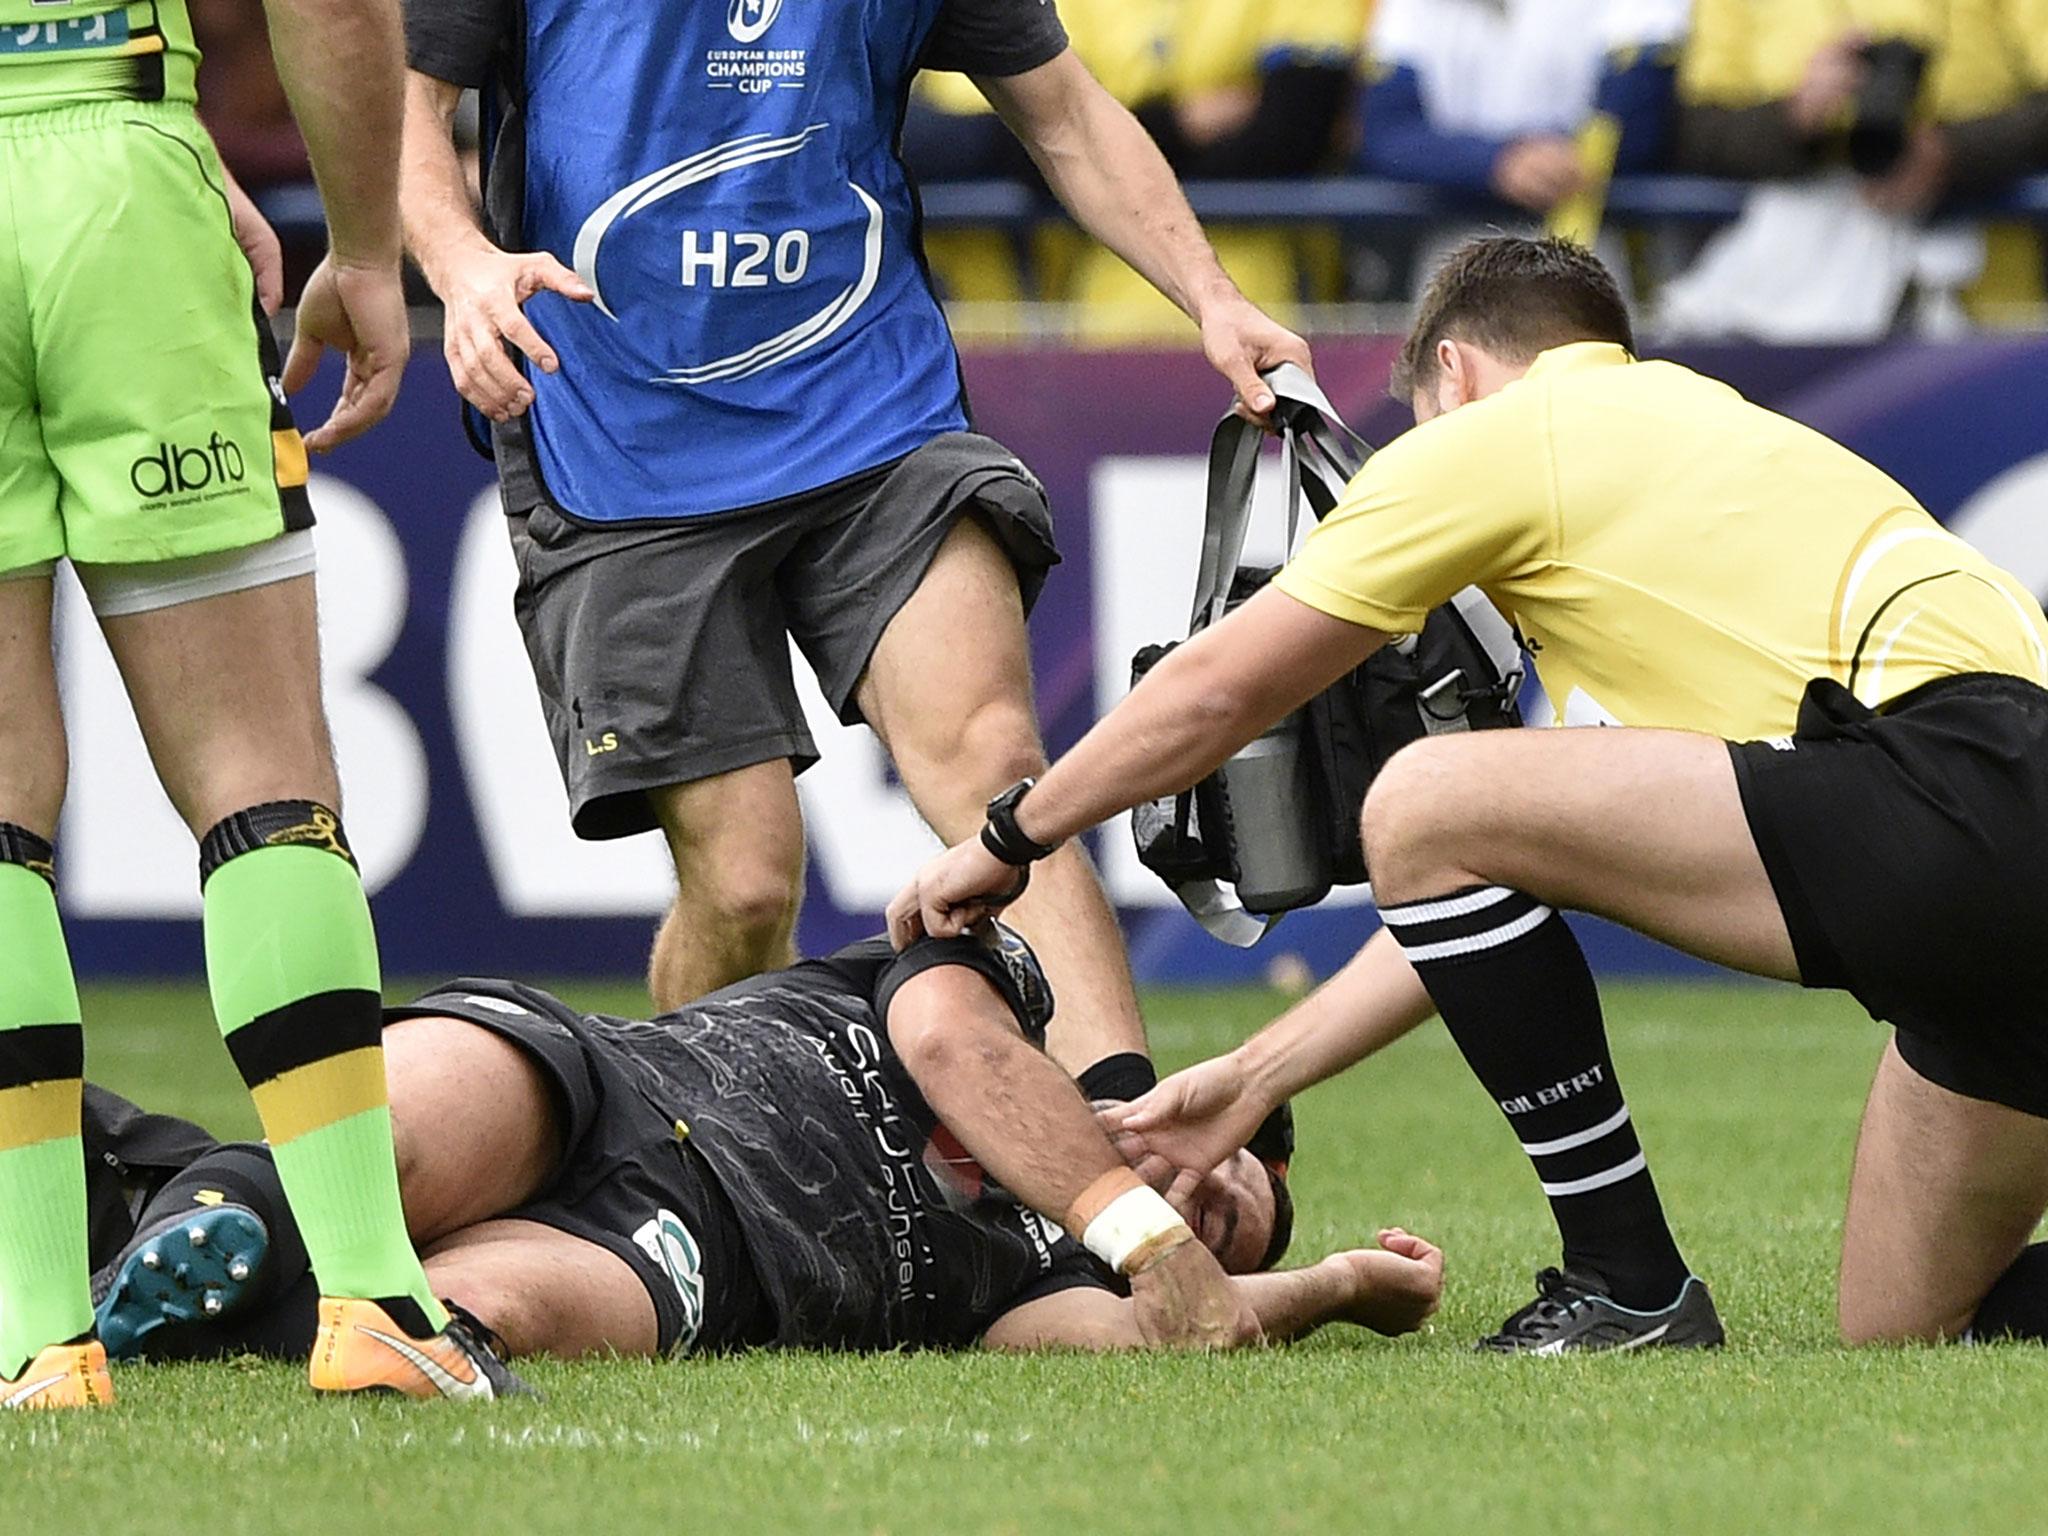 Rugby's problem with concussions has been put under the microscope in recent weeks